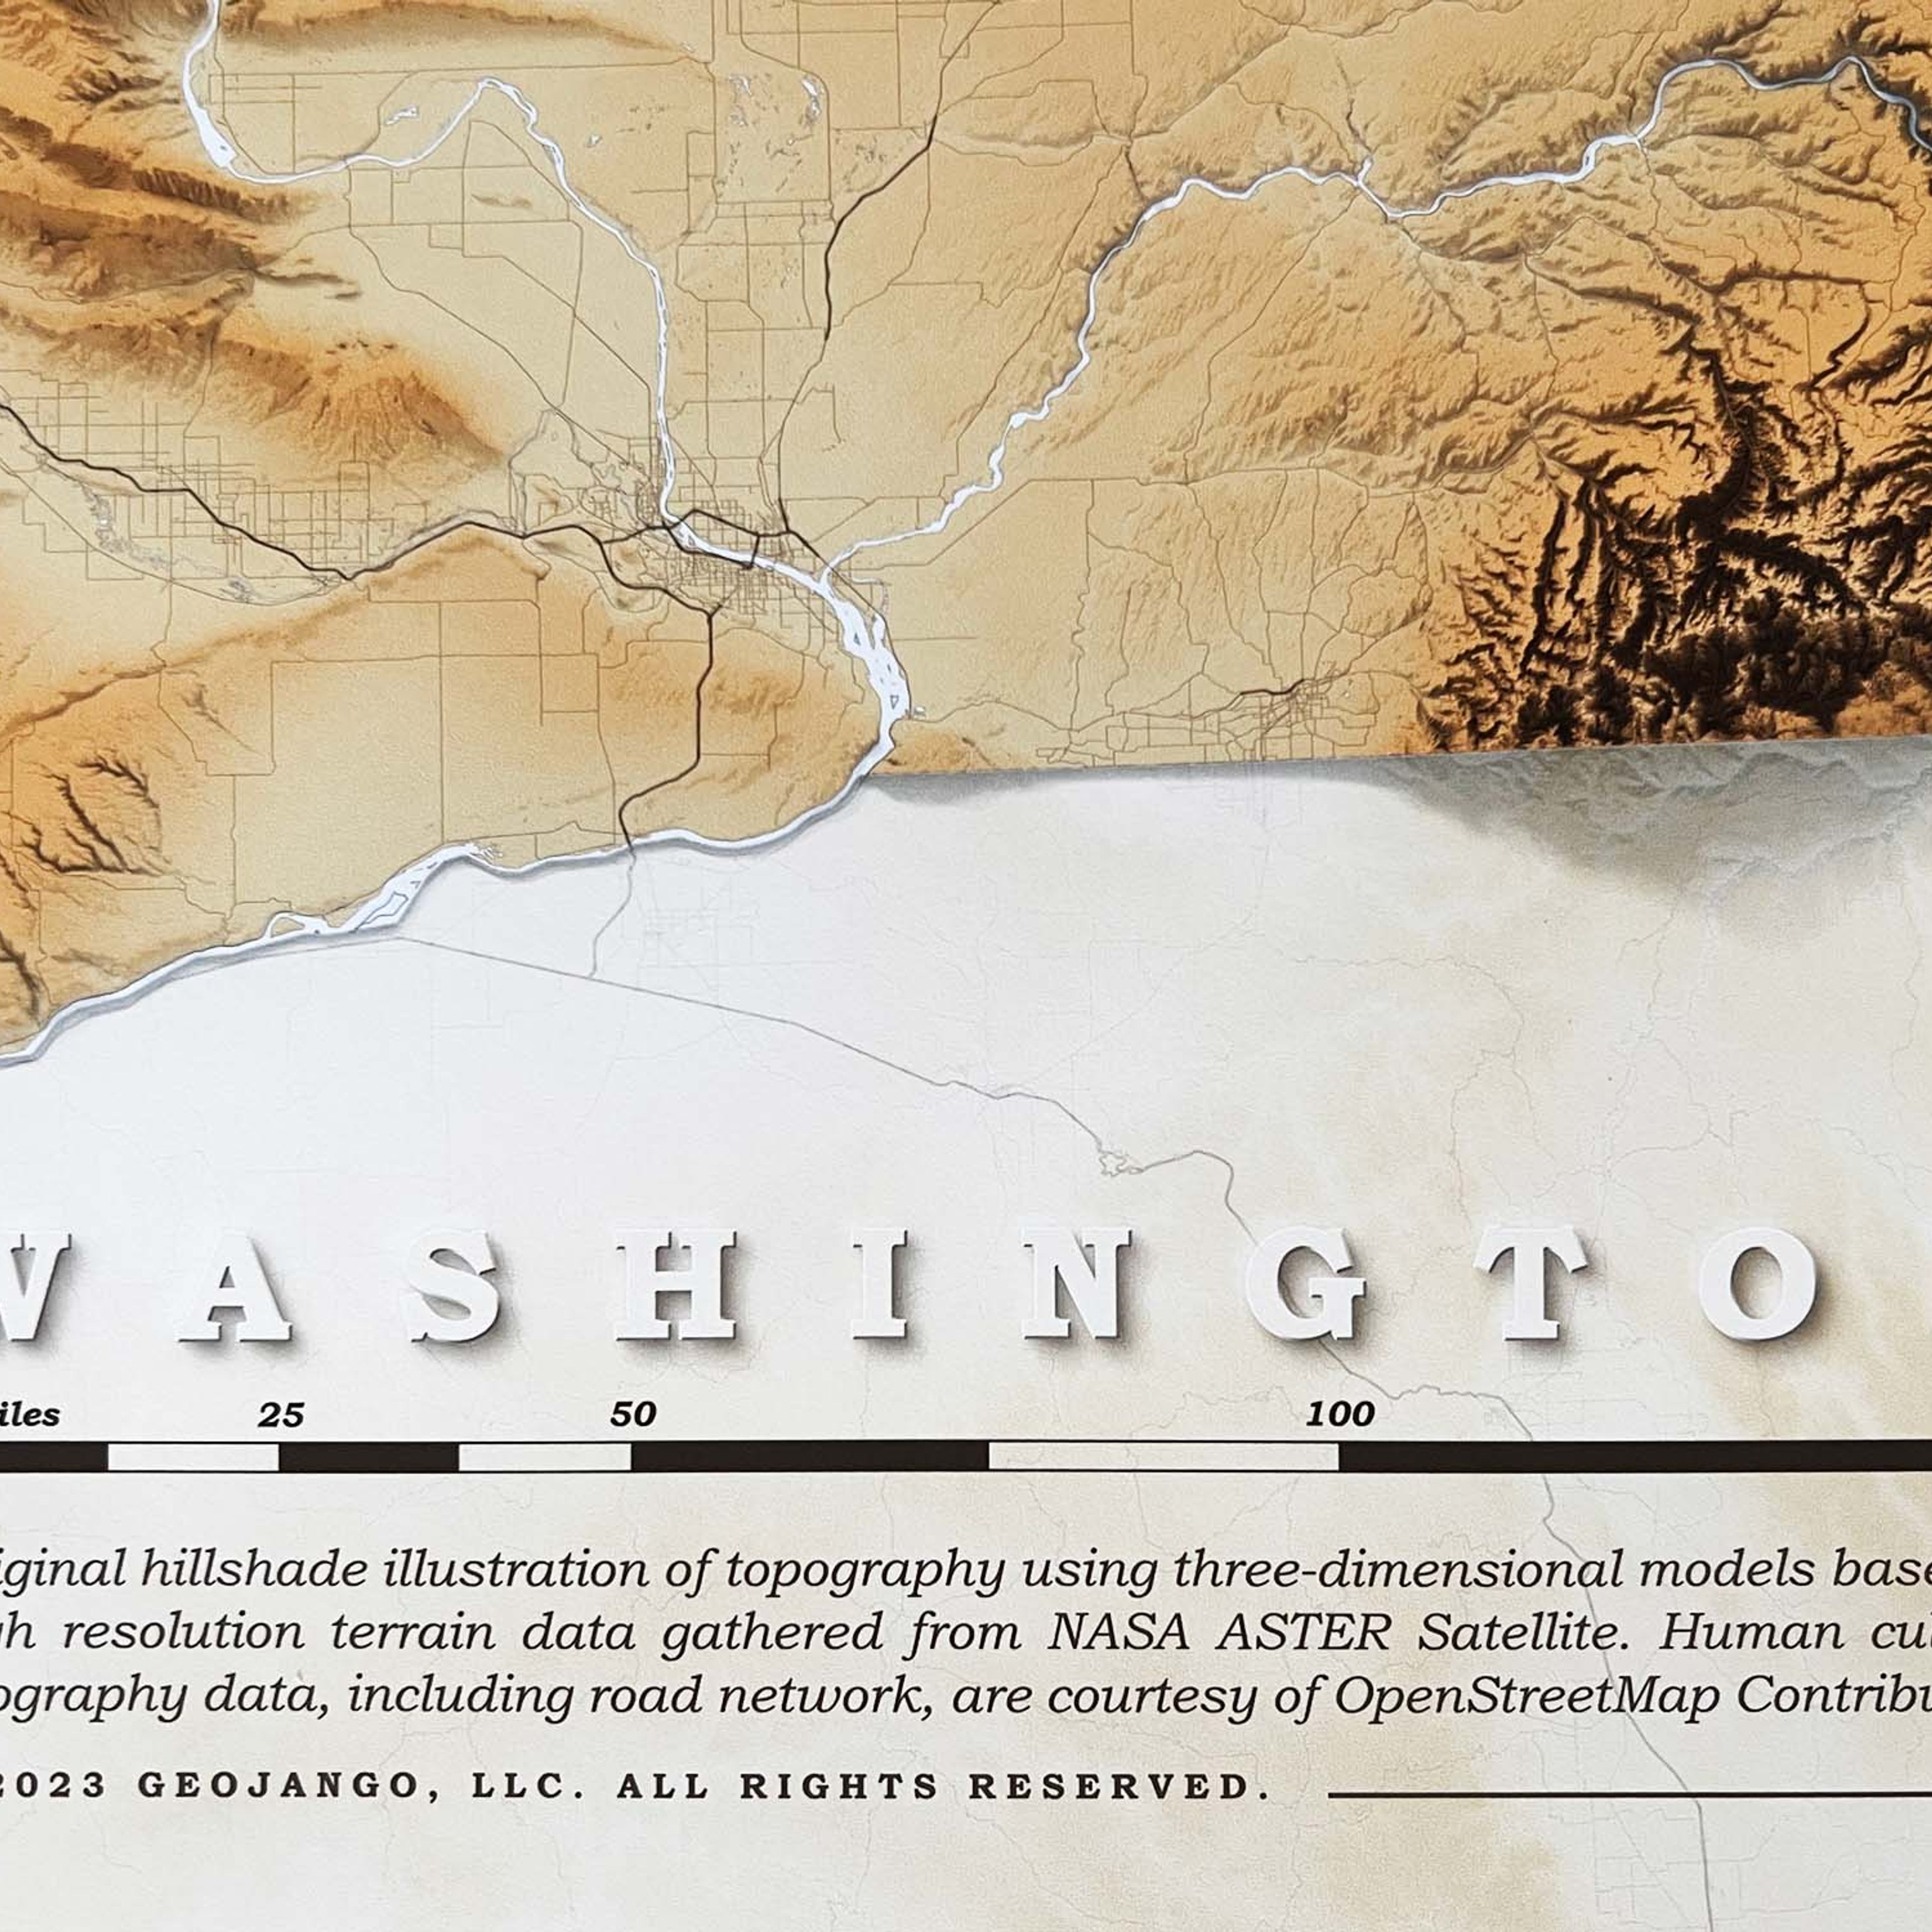 Relief Map of Washington - Topographic Elevation Map with Shaded Relief